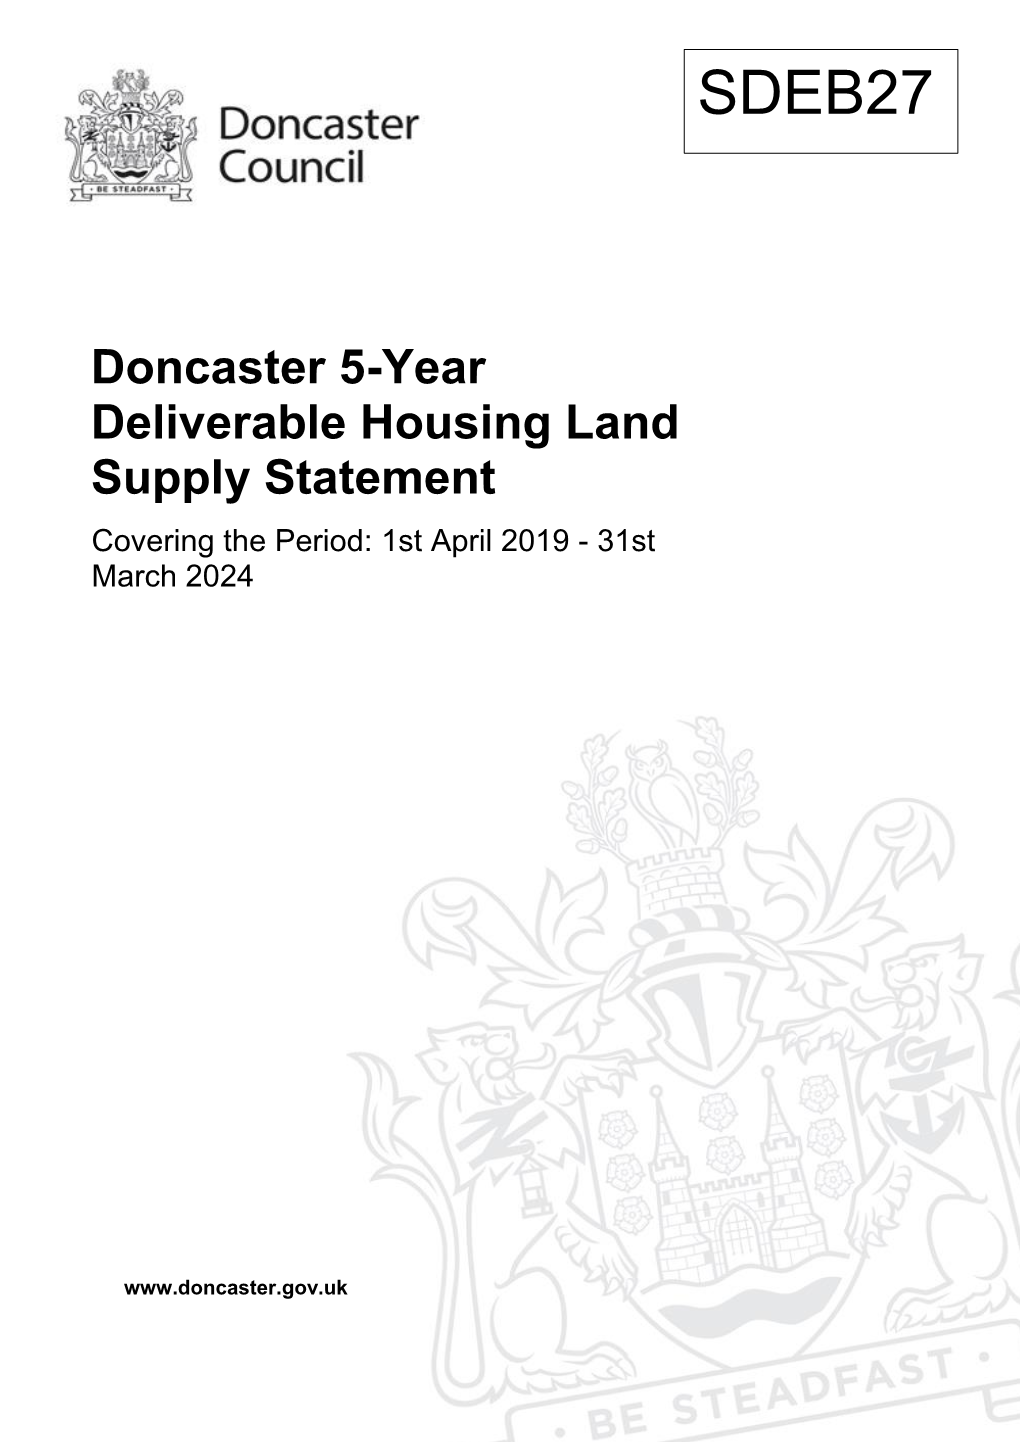 Doncaster 5-Year Deliverable Housing Land Supply Statement